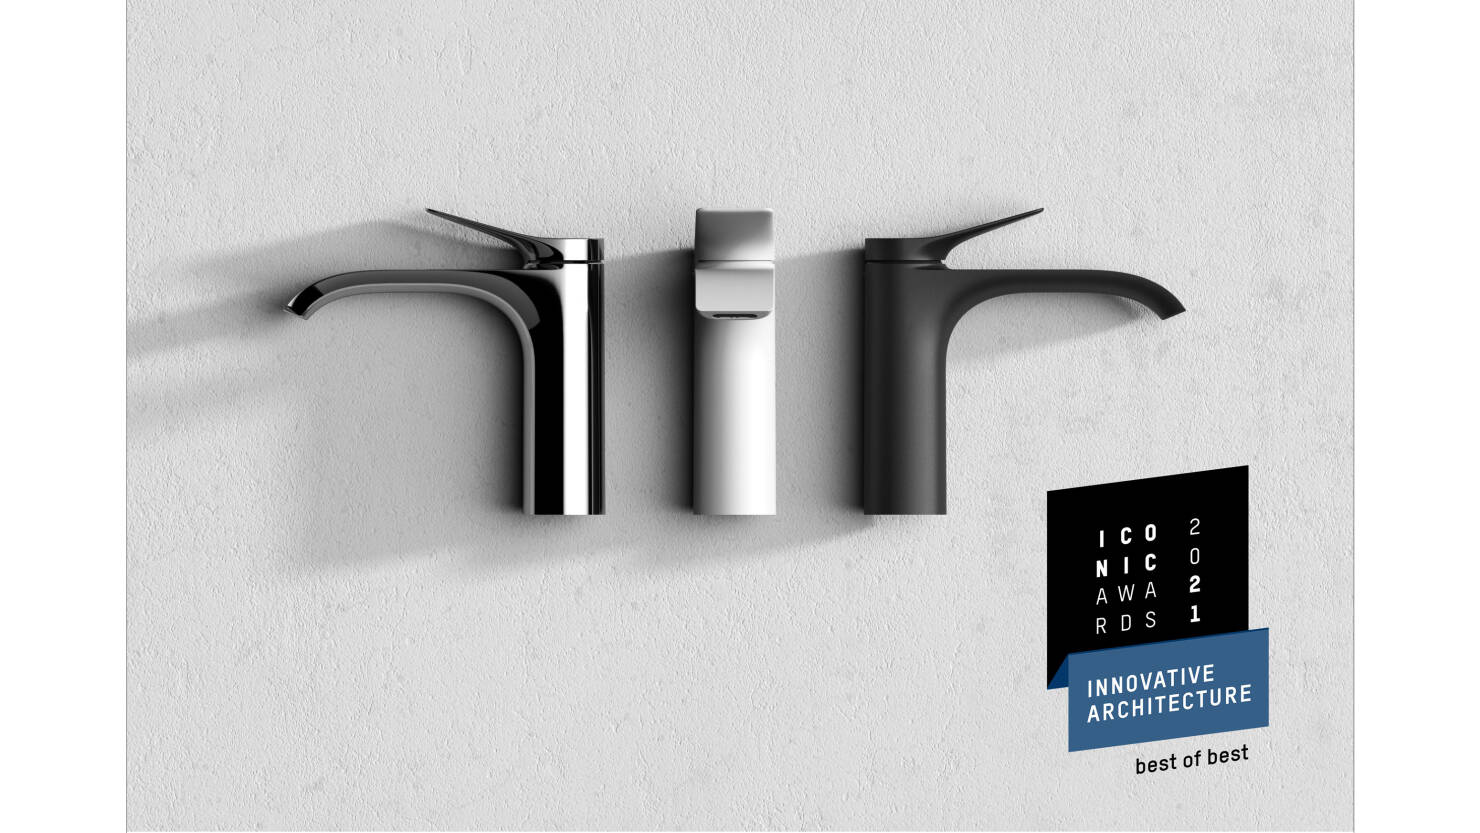 Grohe vs Hansgrohe: Which Is Best For You?